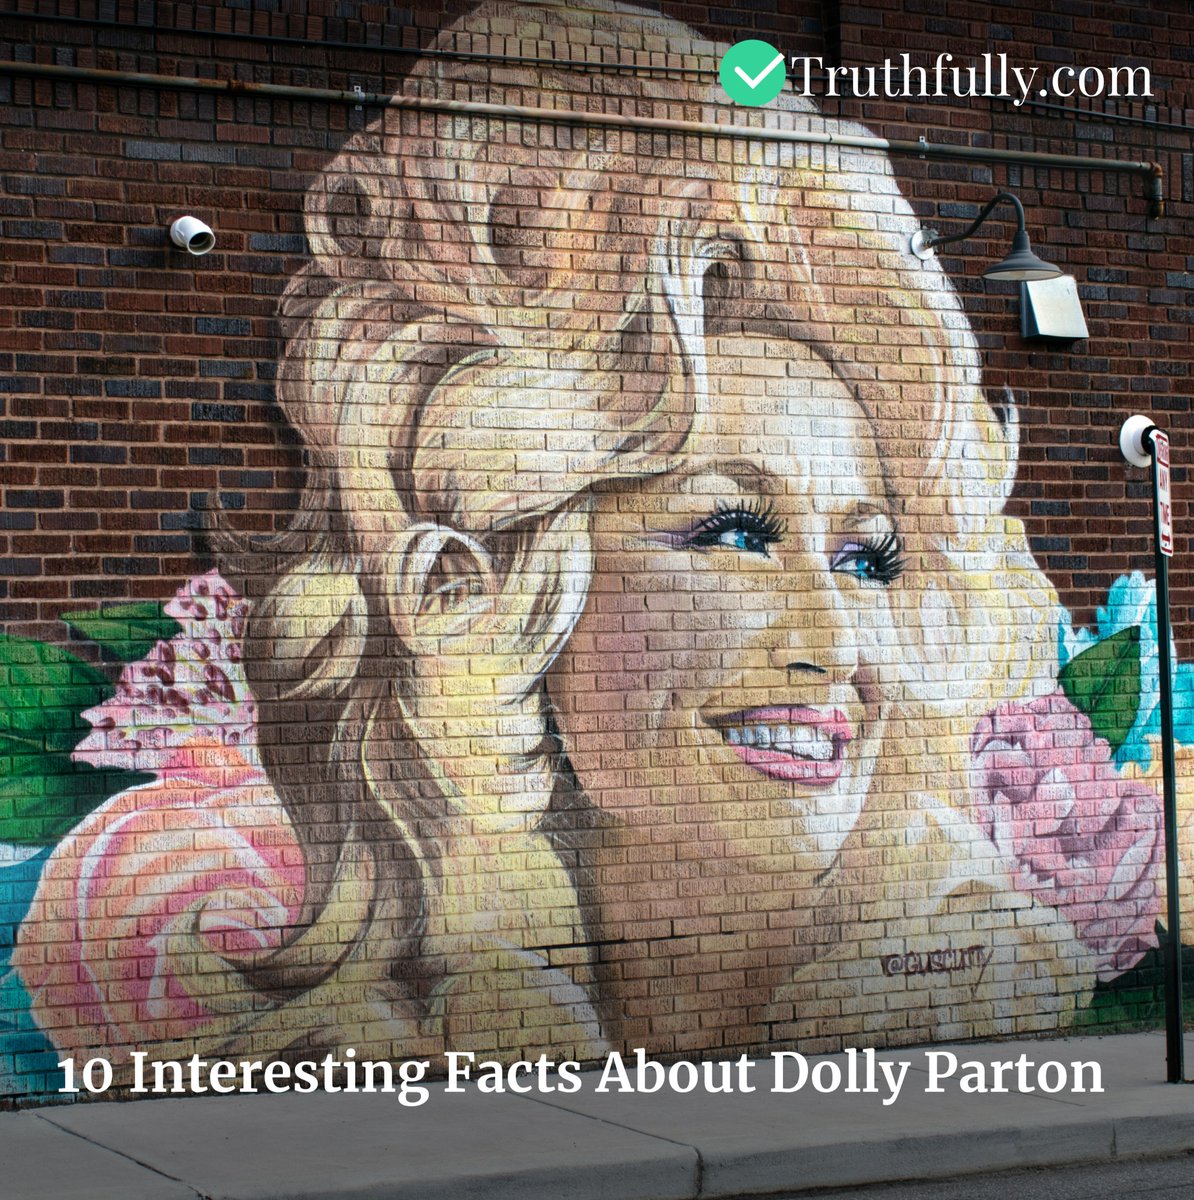 As if her new recent song with Pitbull and multiple world records wasn't enough, here are 10 more interesting facts about the country queen, Dolly Parton: bit.ly/4dbLzD1

#truthfully #facts #dollyparton #countrymusic #Pitbull #music #powerfulwomen